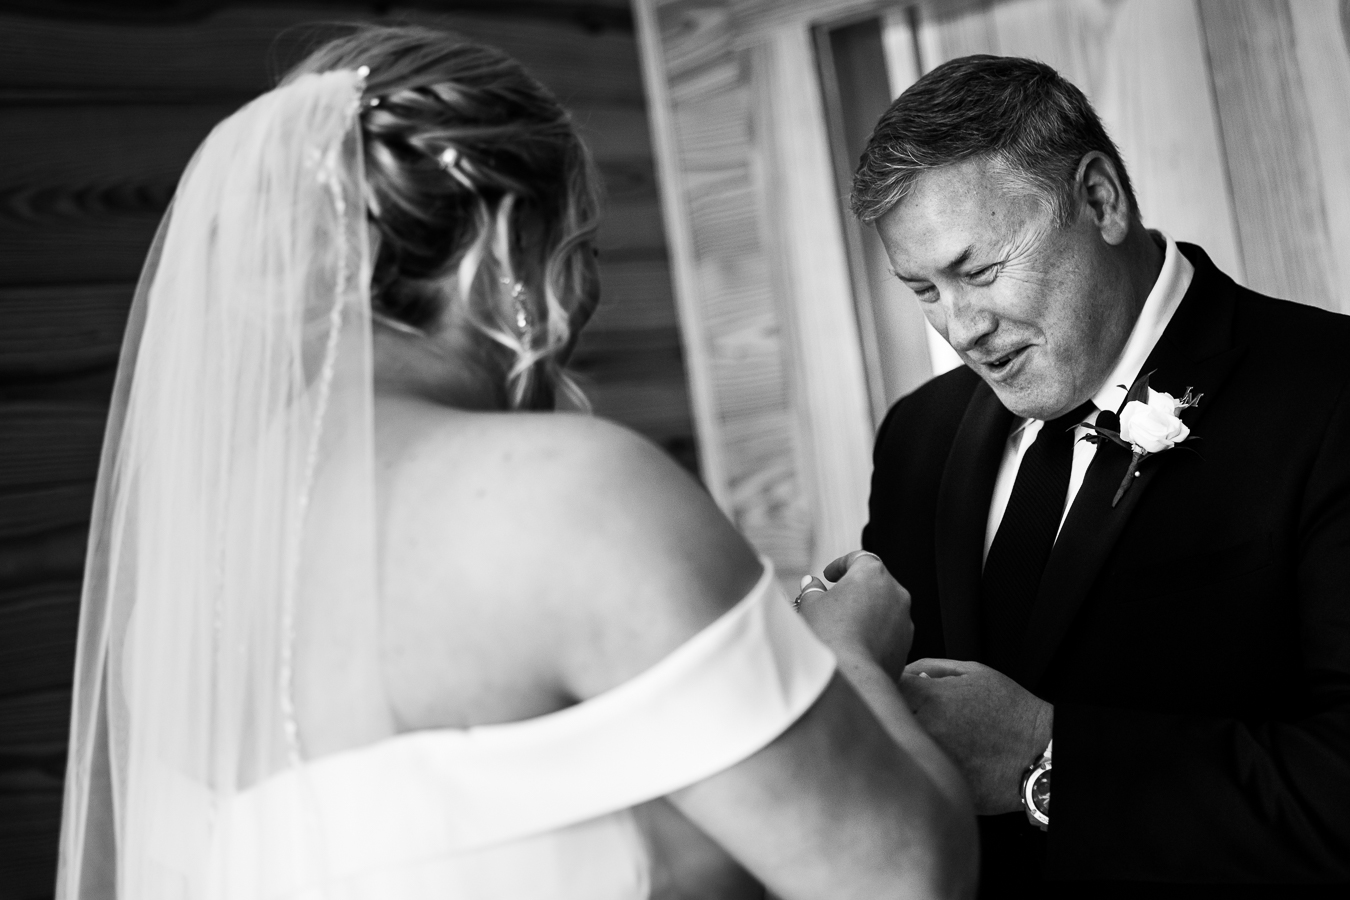 Middleburg Barn Wedding Photographer, lisa rhinehart, captures this black and white image of the father of the bride smiling at his daughter as he sees her for the first time in her wedding gown before her wedding ceremony in Virginia 